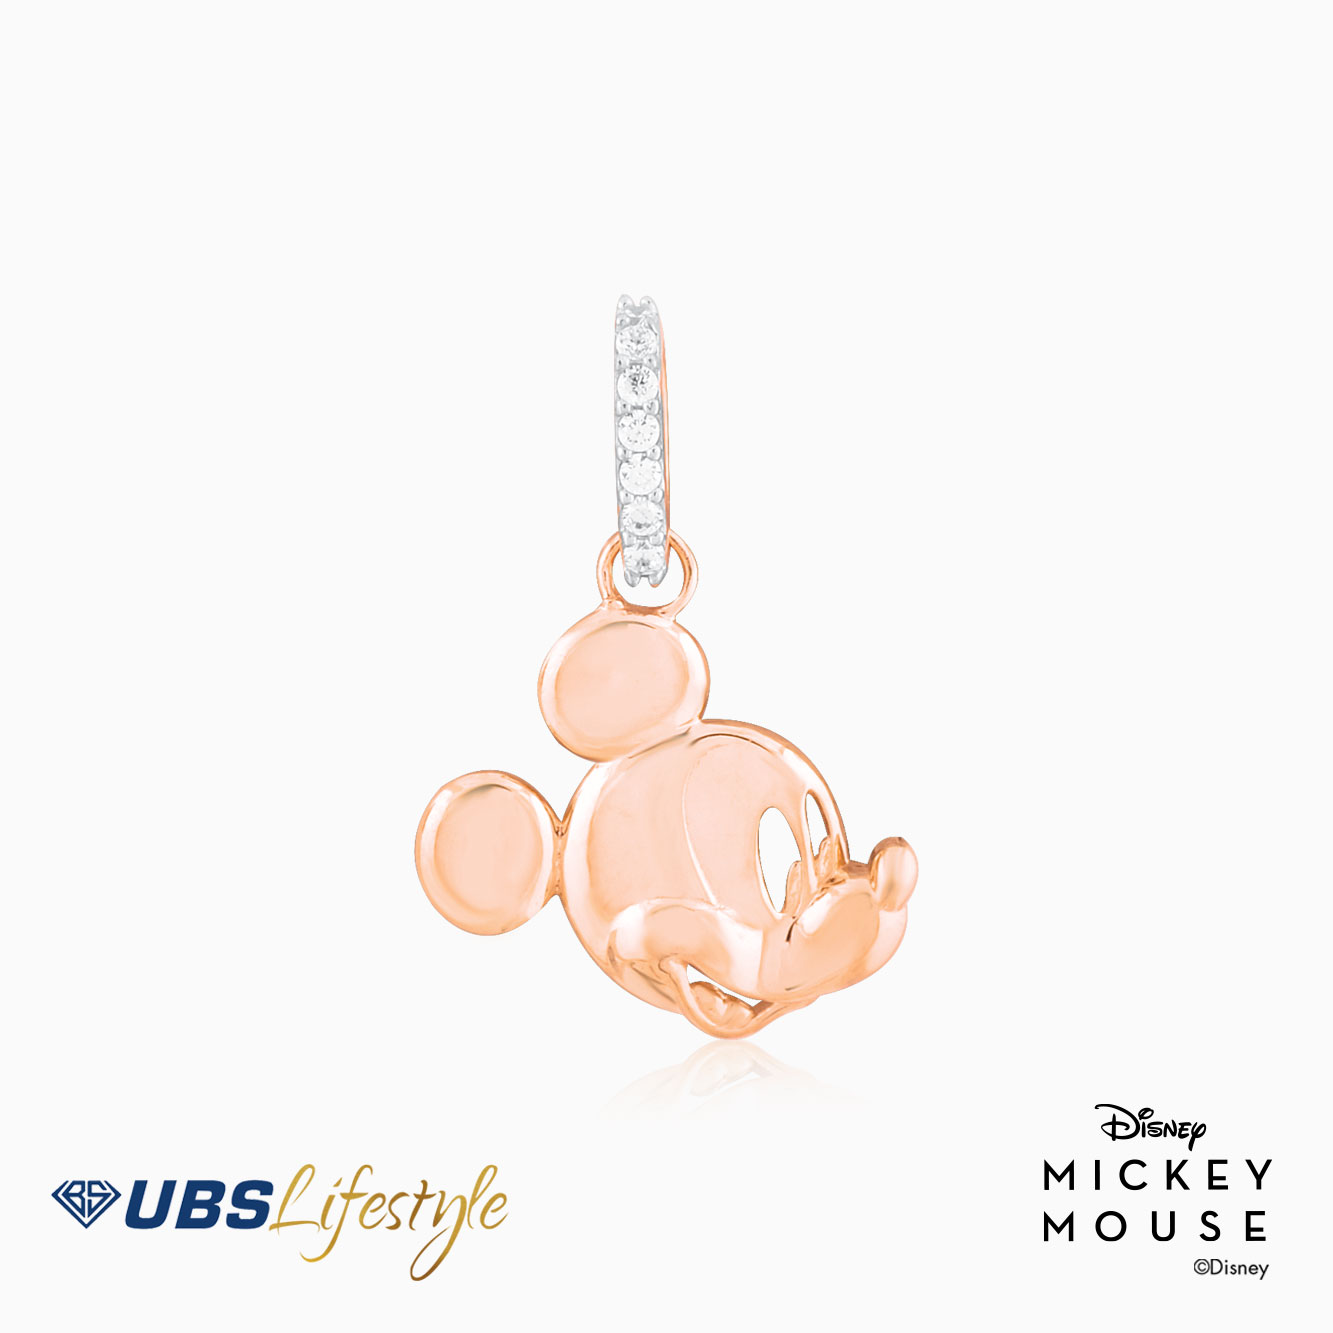 UBS Liontin Emas Disney Mickey Mouse - Cly0010 - 17K